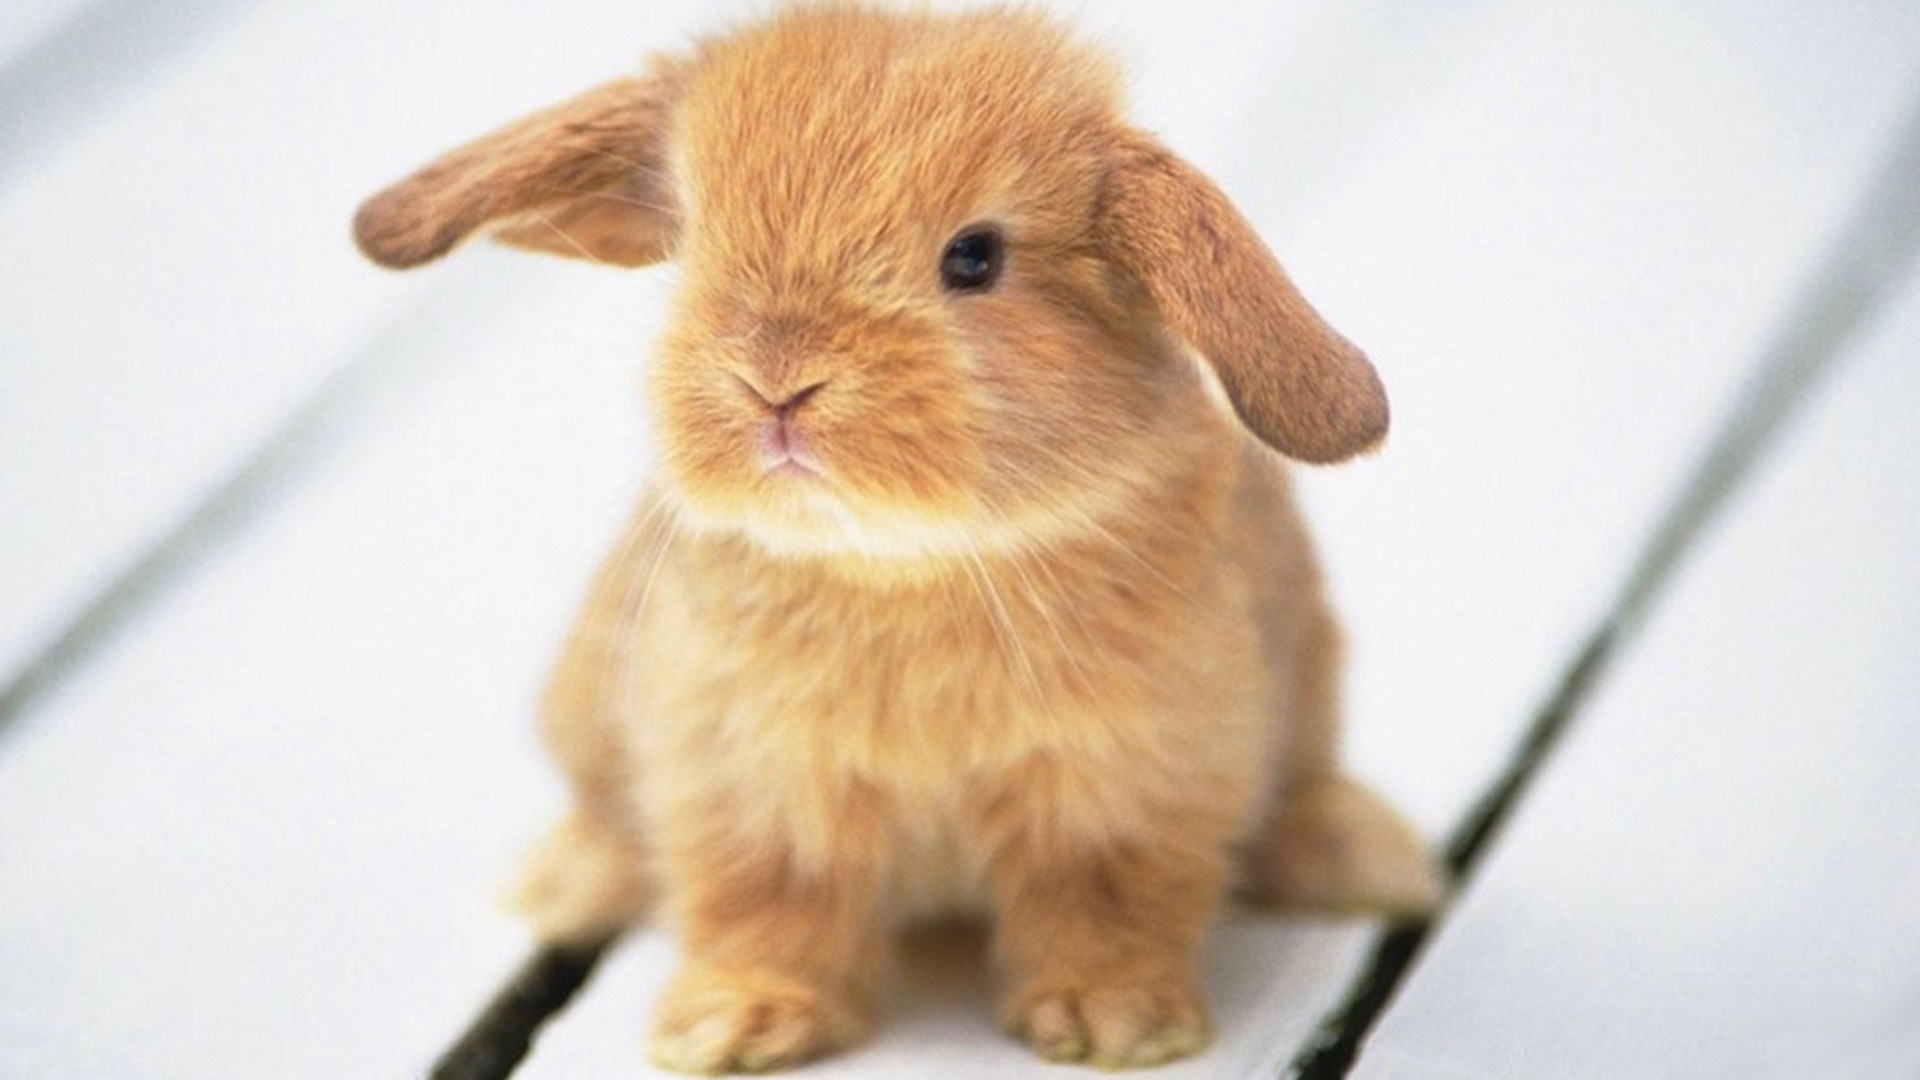 Bunny: Holland Lop, One of the smallest lop-eared breeds. 1920x1080 Full HD Wallpaper.